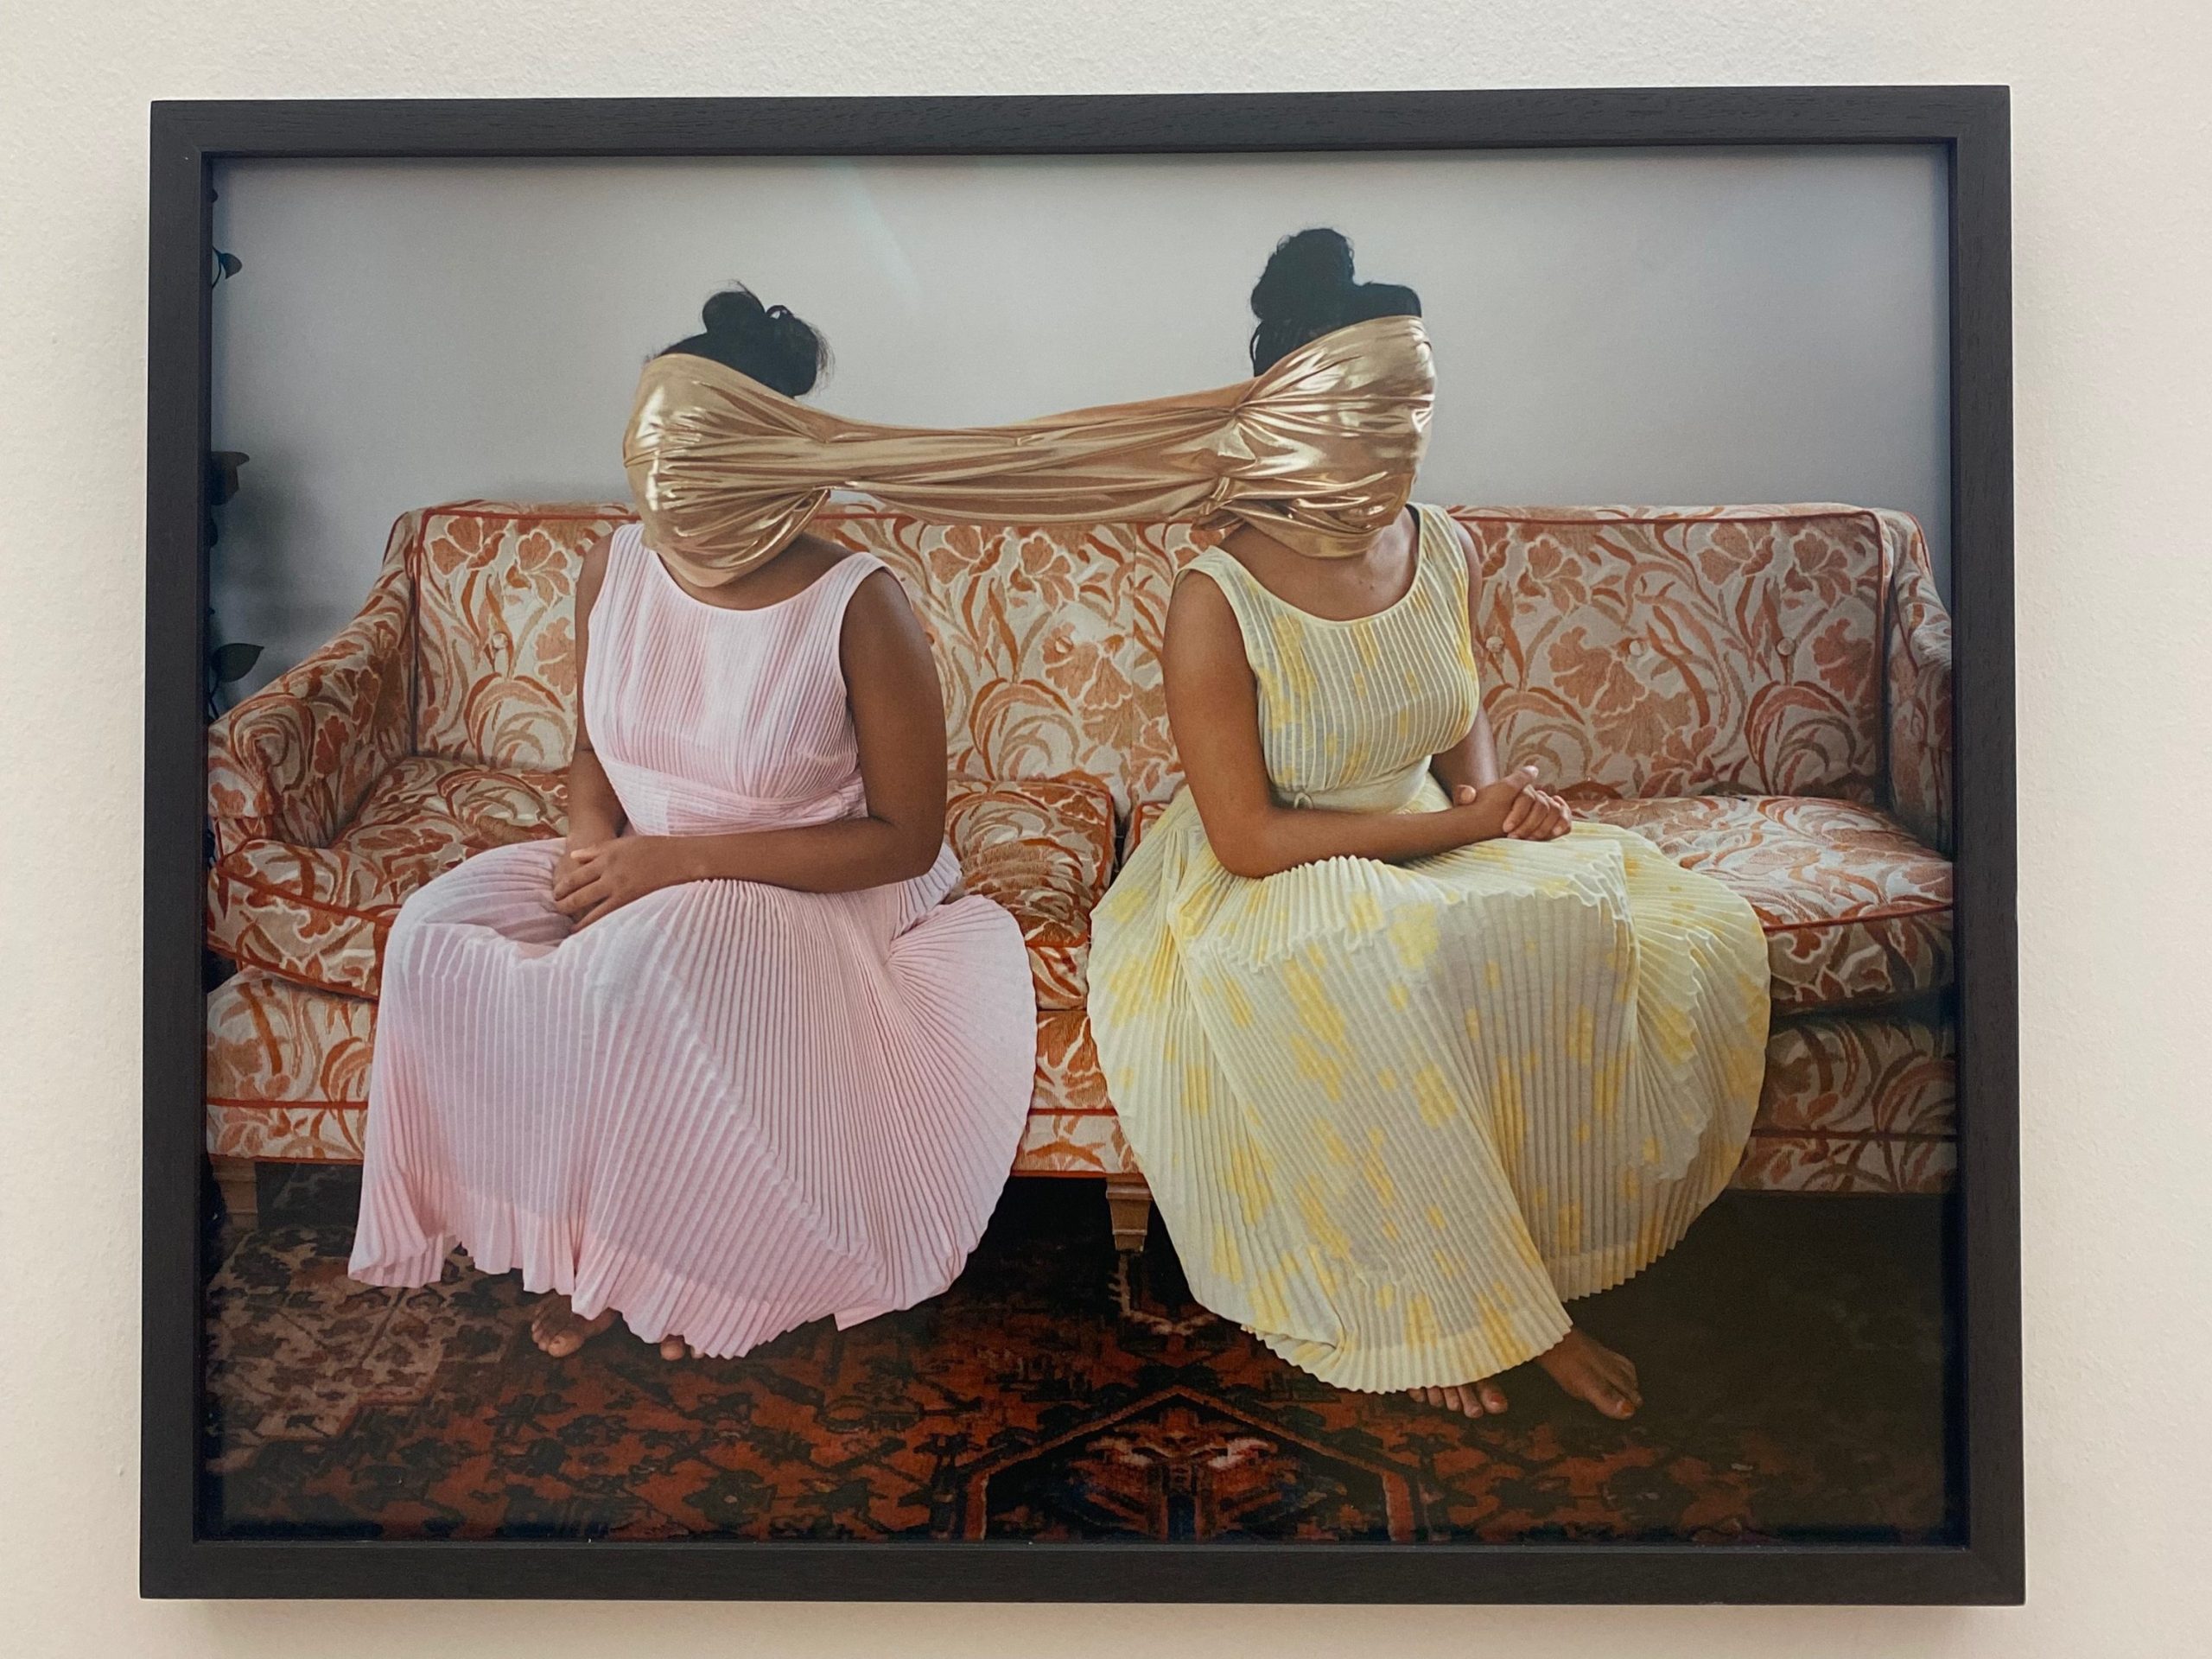 Image: Nydia Blas, "Gold The Girl Who Spun Gold." A framed photo of two Black women seated on a couch. Their posture and body language is identical: hands folded in their laps, feet crossed, hair up in a bun, at a 45 degree angle view away from the viewer, but in opposite directions, turned from each other. The one on the right wears a yellow translucent dress, while the one on the left wears a pink translucent dress. Connecting the two of them is a brassy gold cloth stretched between their heads, covering their faces. Photo by Jasmine Barnes.